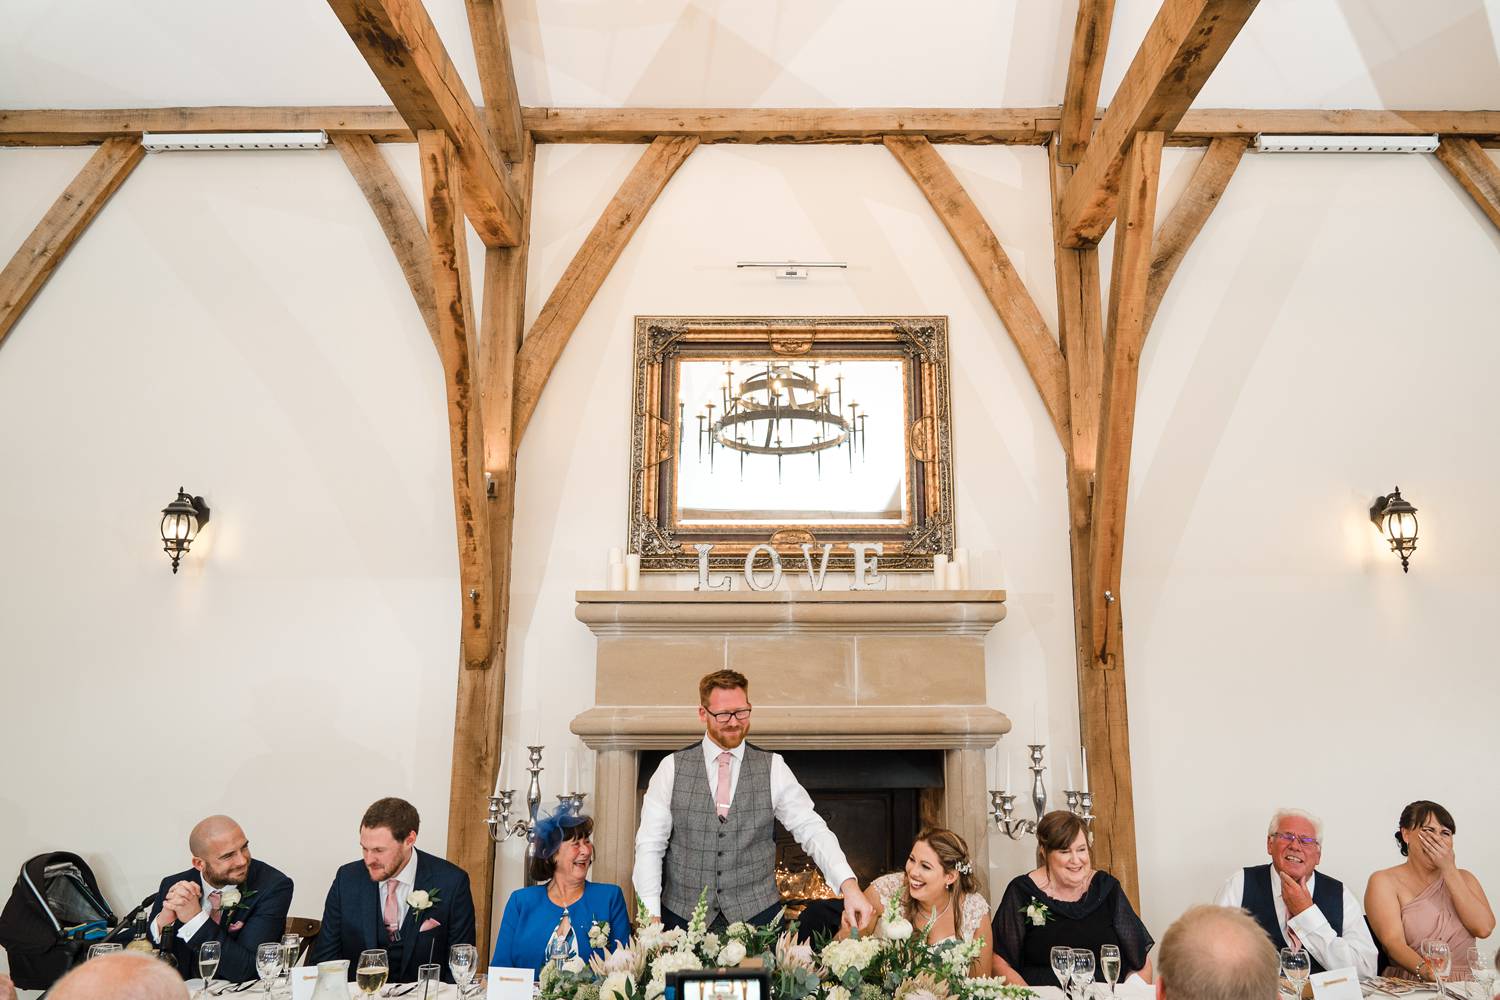 A wide photo showing all the wedding party sat at the top table at Swancar Farm during the groom's speech. The bride is laughing whilst the groom puts his hand on her shoulder. The maid of honour covers her mouth with laughter